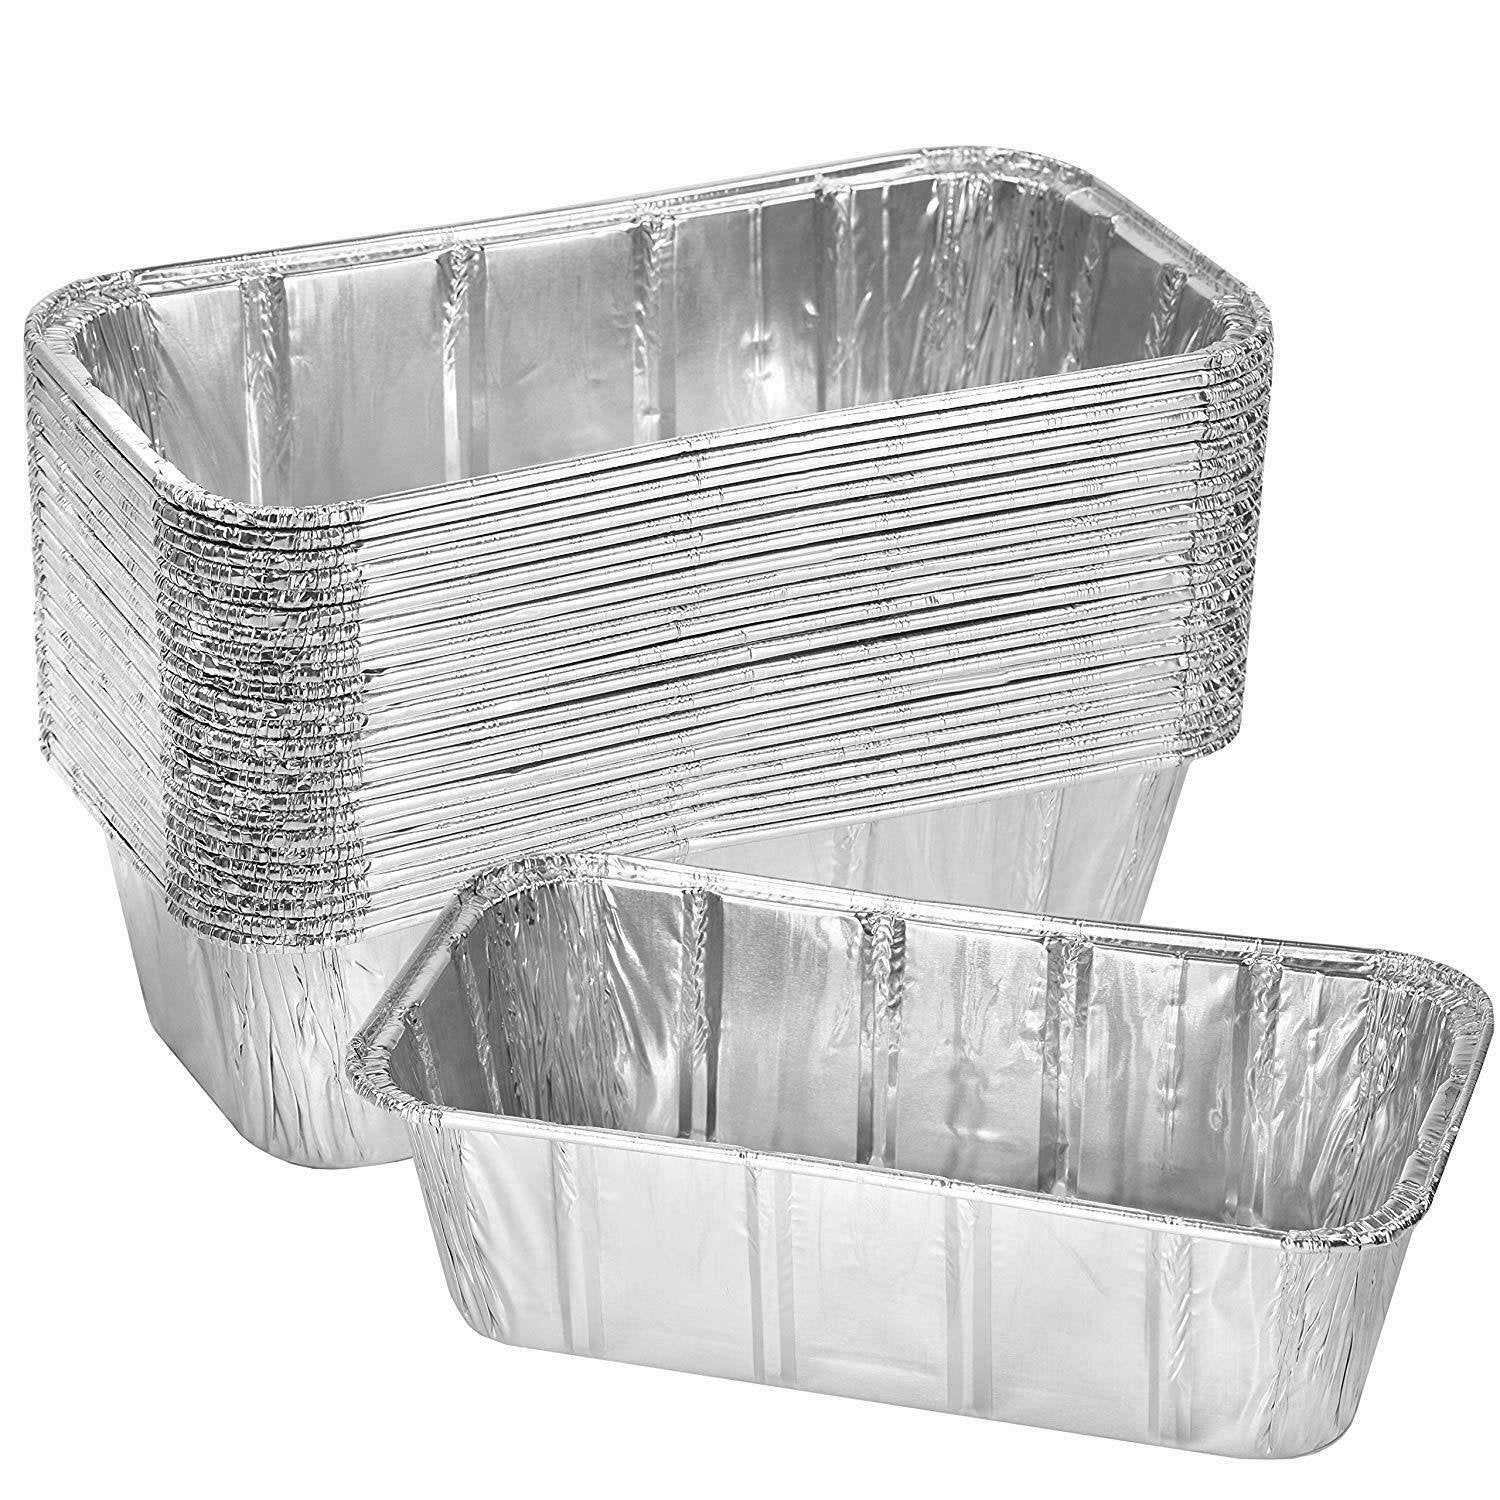 Thick Aluminum Loaf Pans (30 Pack, 8 x 4 Inches)